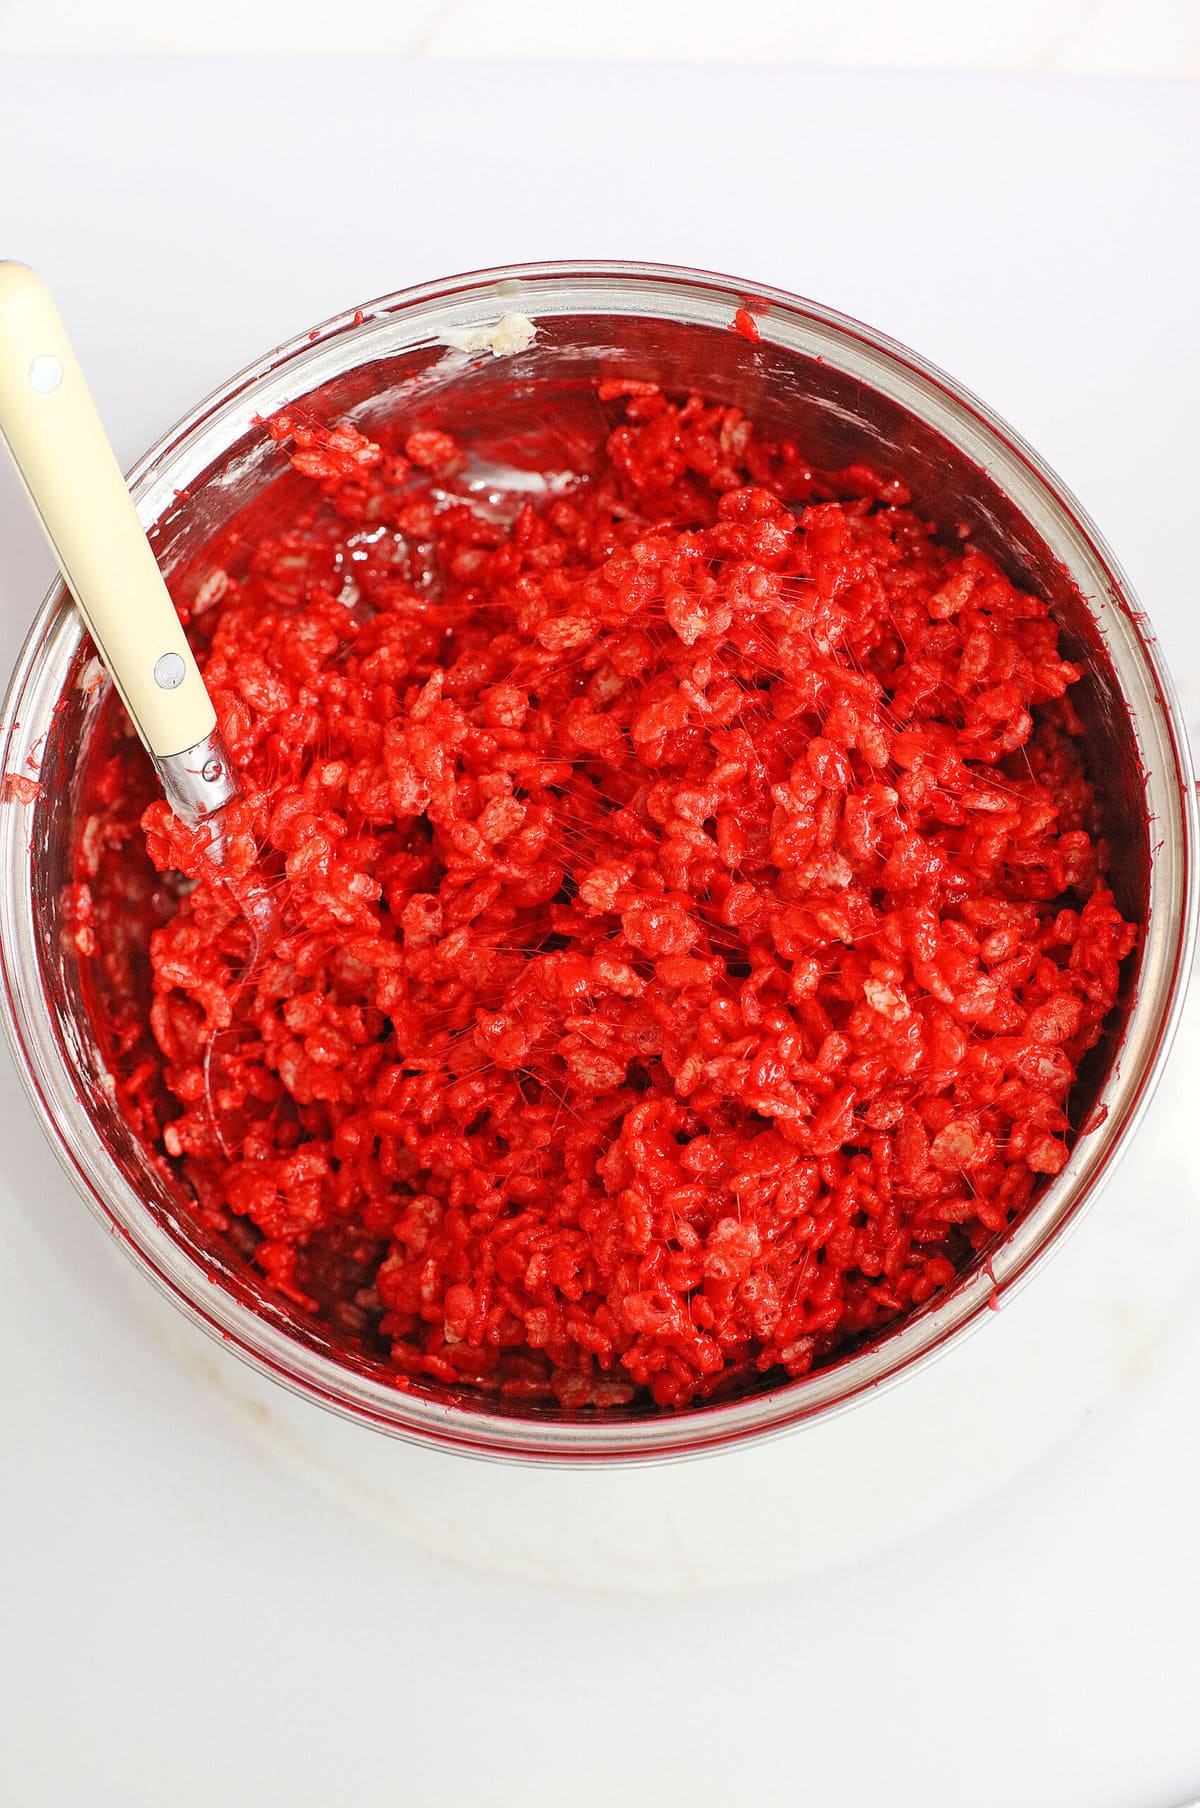 Mixing in the red food coloring.